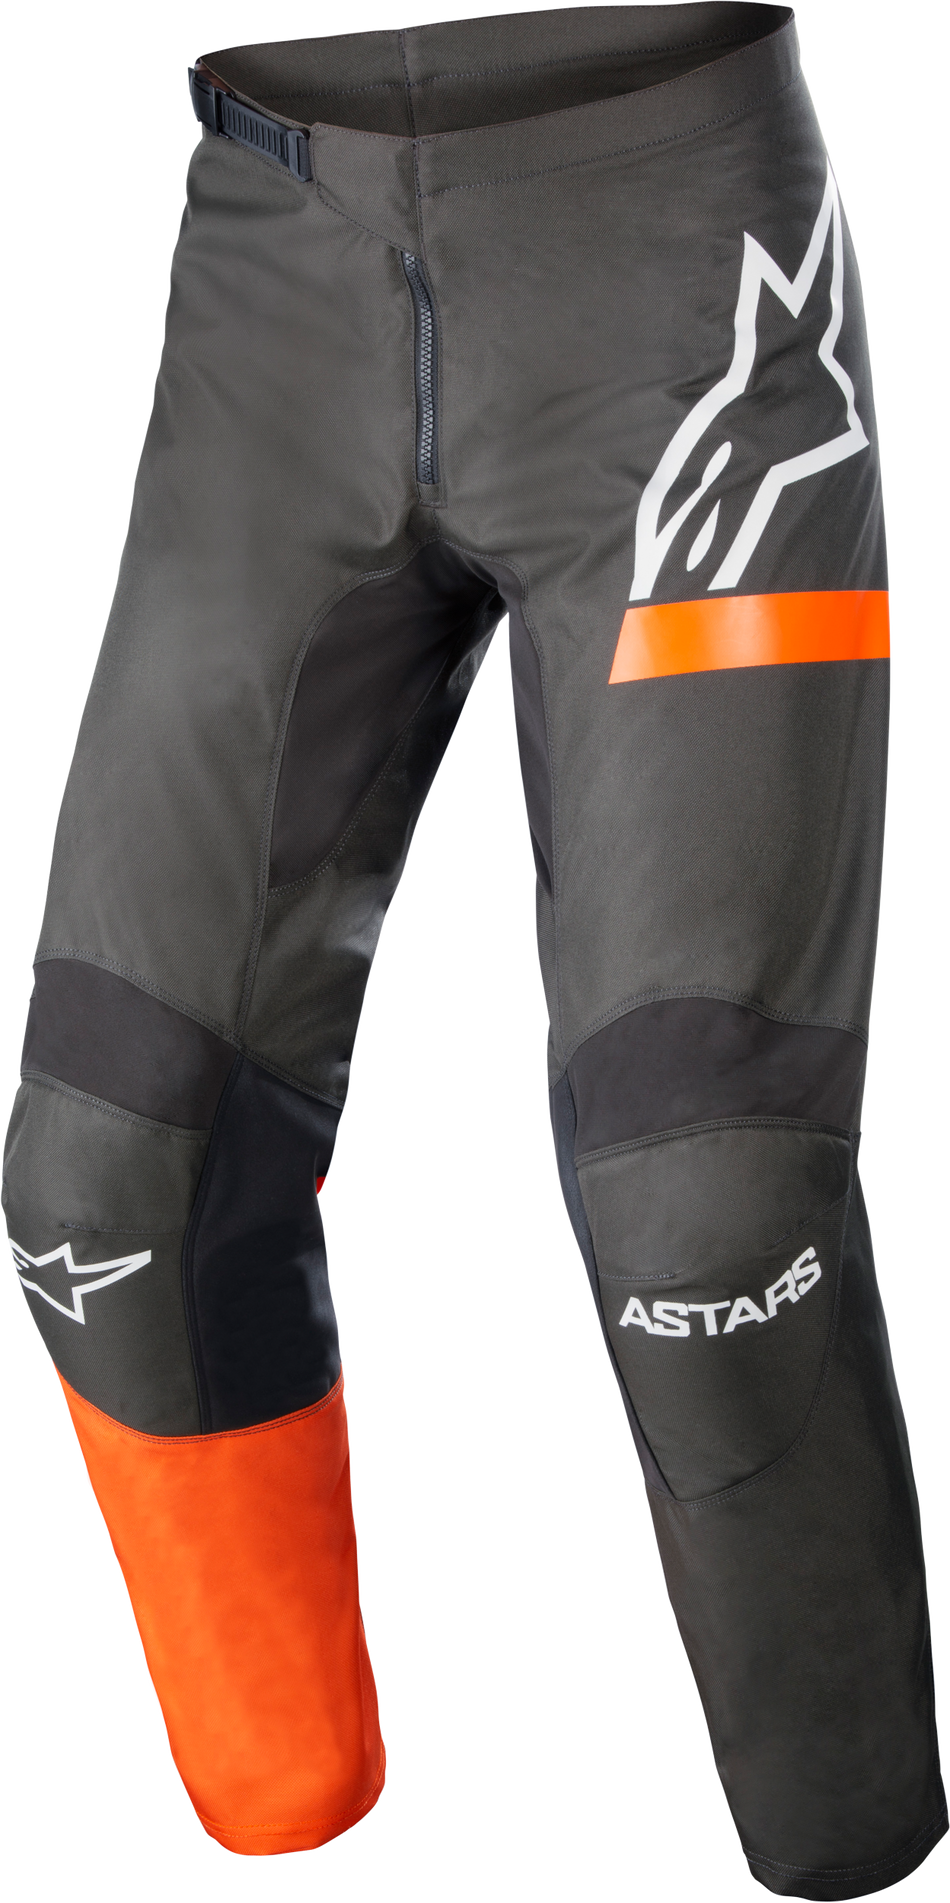 ALPINESTARS Fluid Chaser Pants Anthracite/Coral Fluo Sz 40 3722422-1794-40